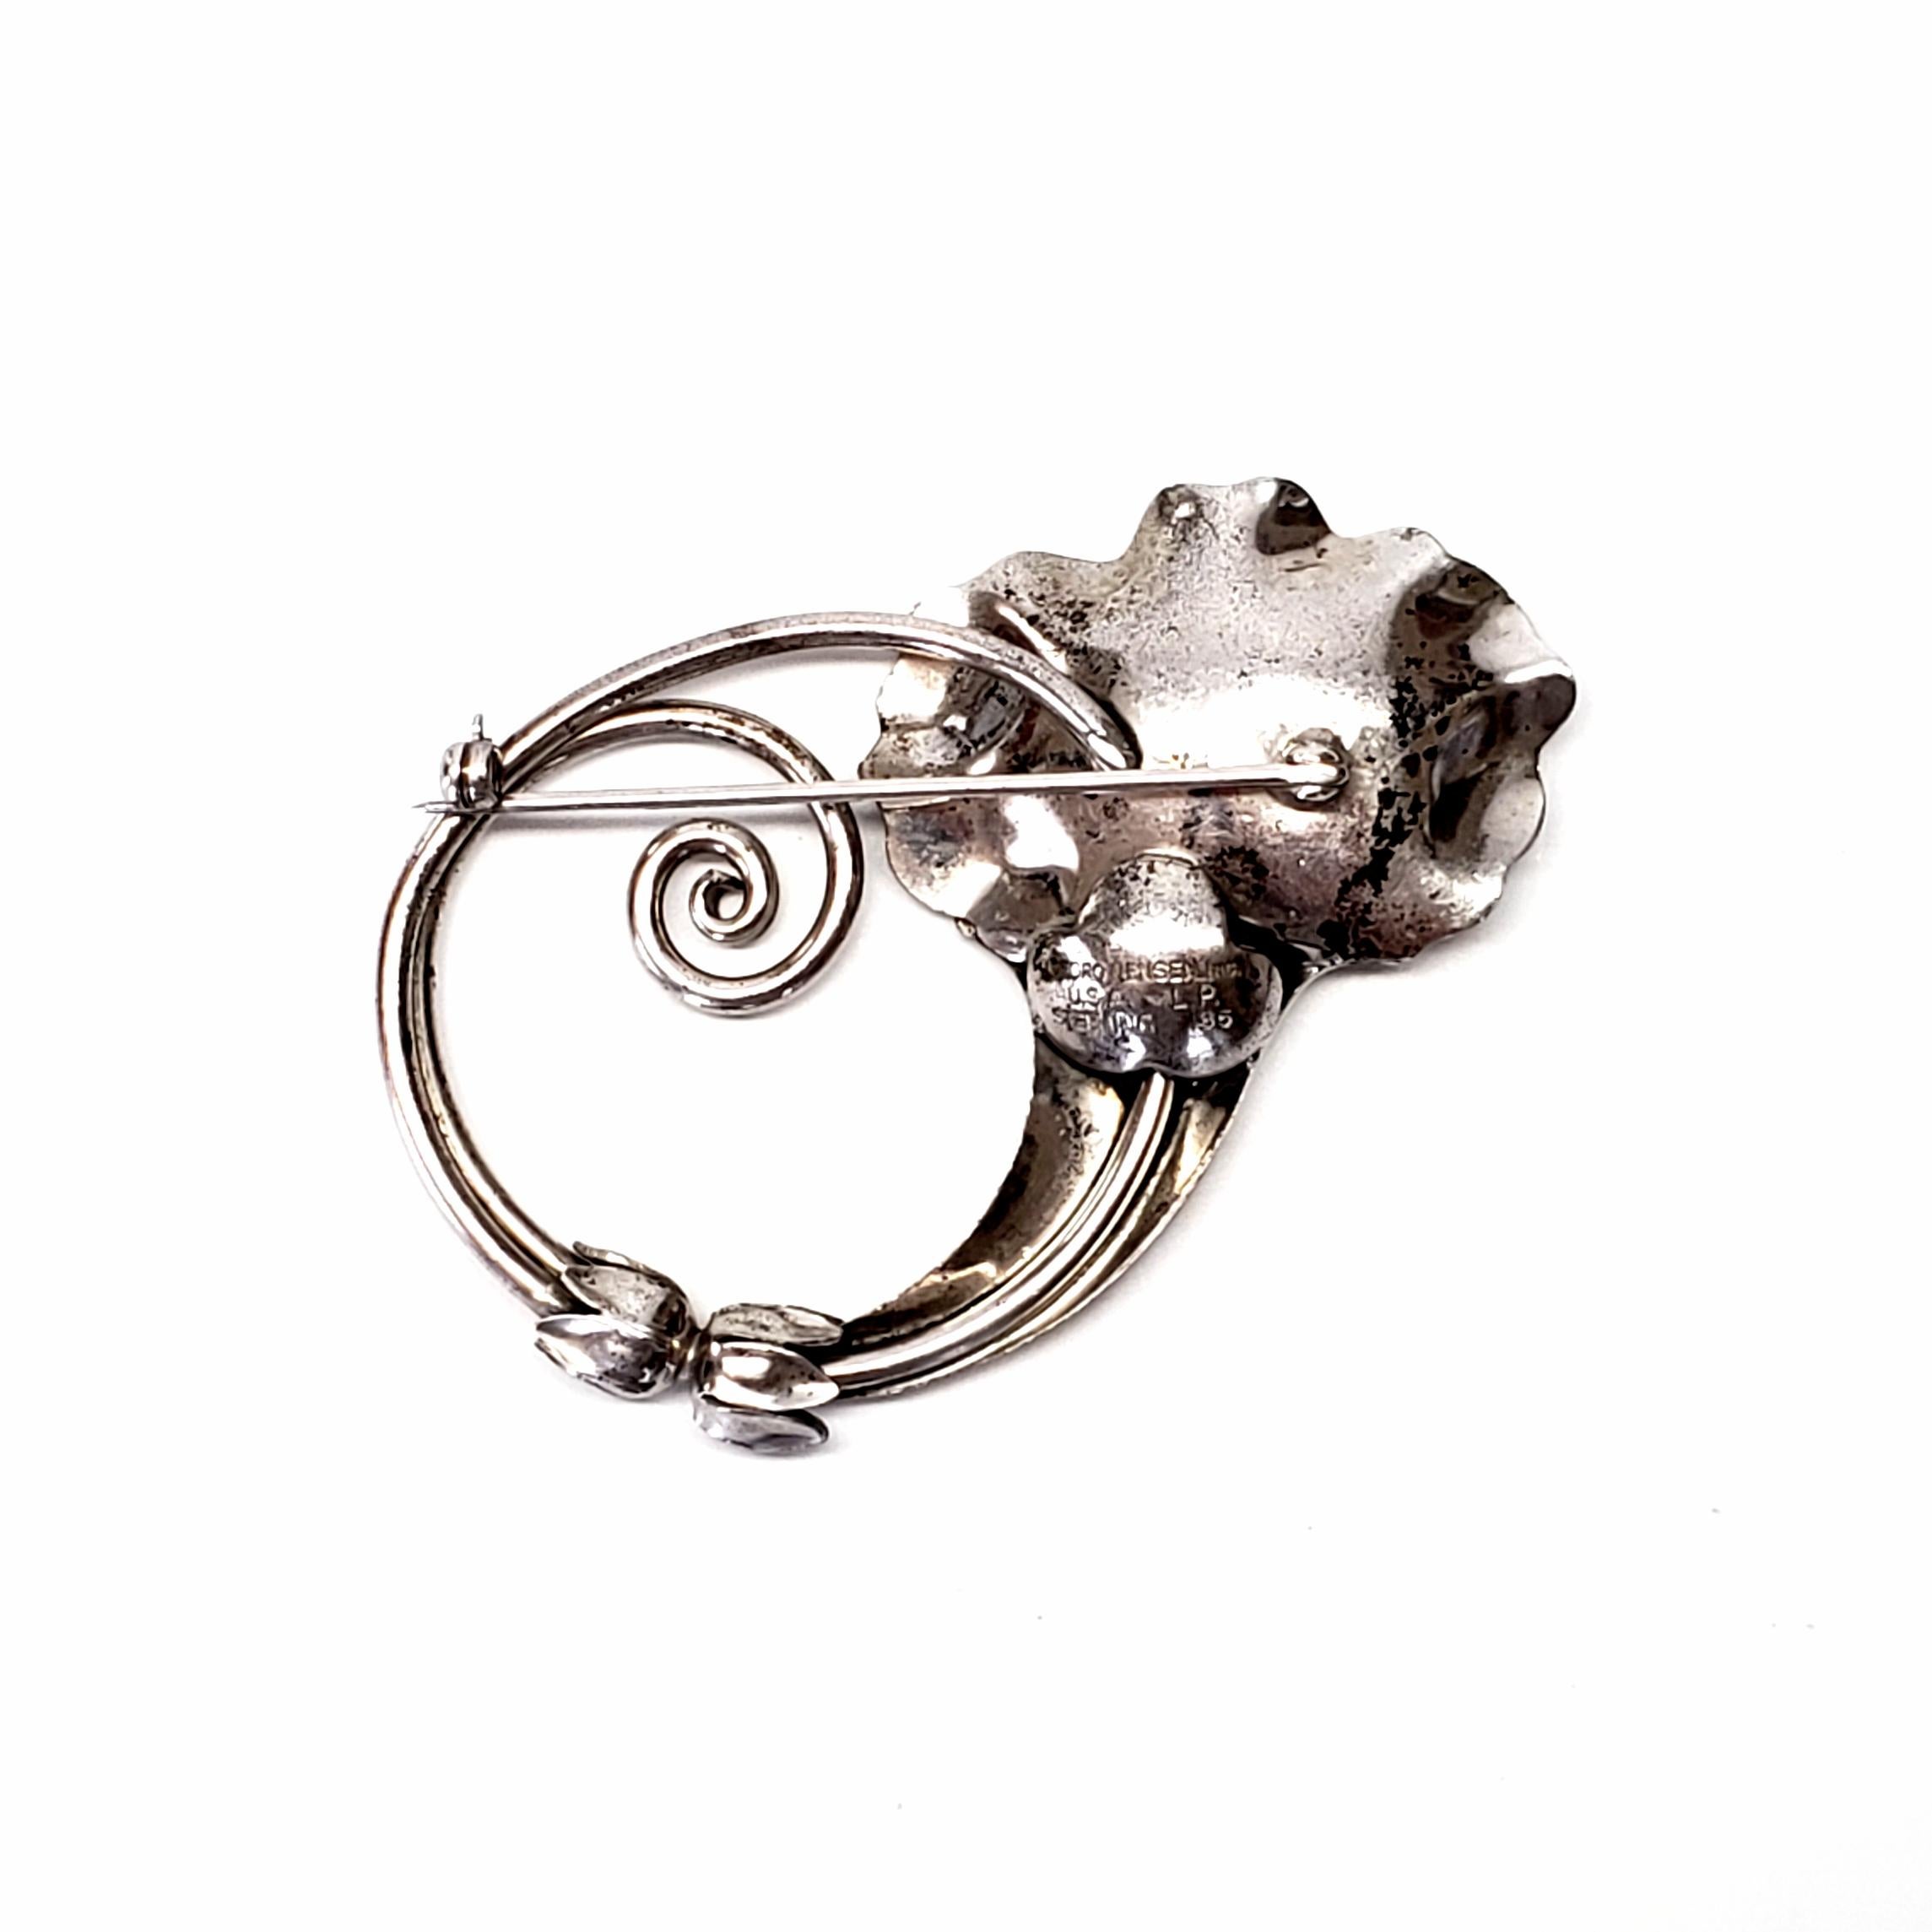 Vintage Georg Jensen USA sterling silver trumpet flower pin / brooch, designed by Alphonse LaPaglia, circa 1940s.

Georg Jensen USA of 5th Avenue in NYC sold decorative items including jewelry, after sole agency rights were granted for 100 years in